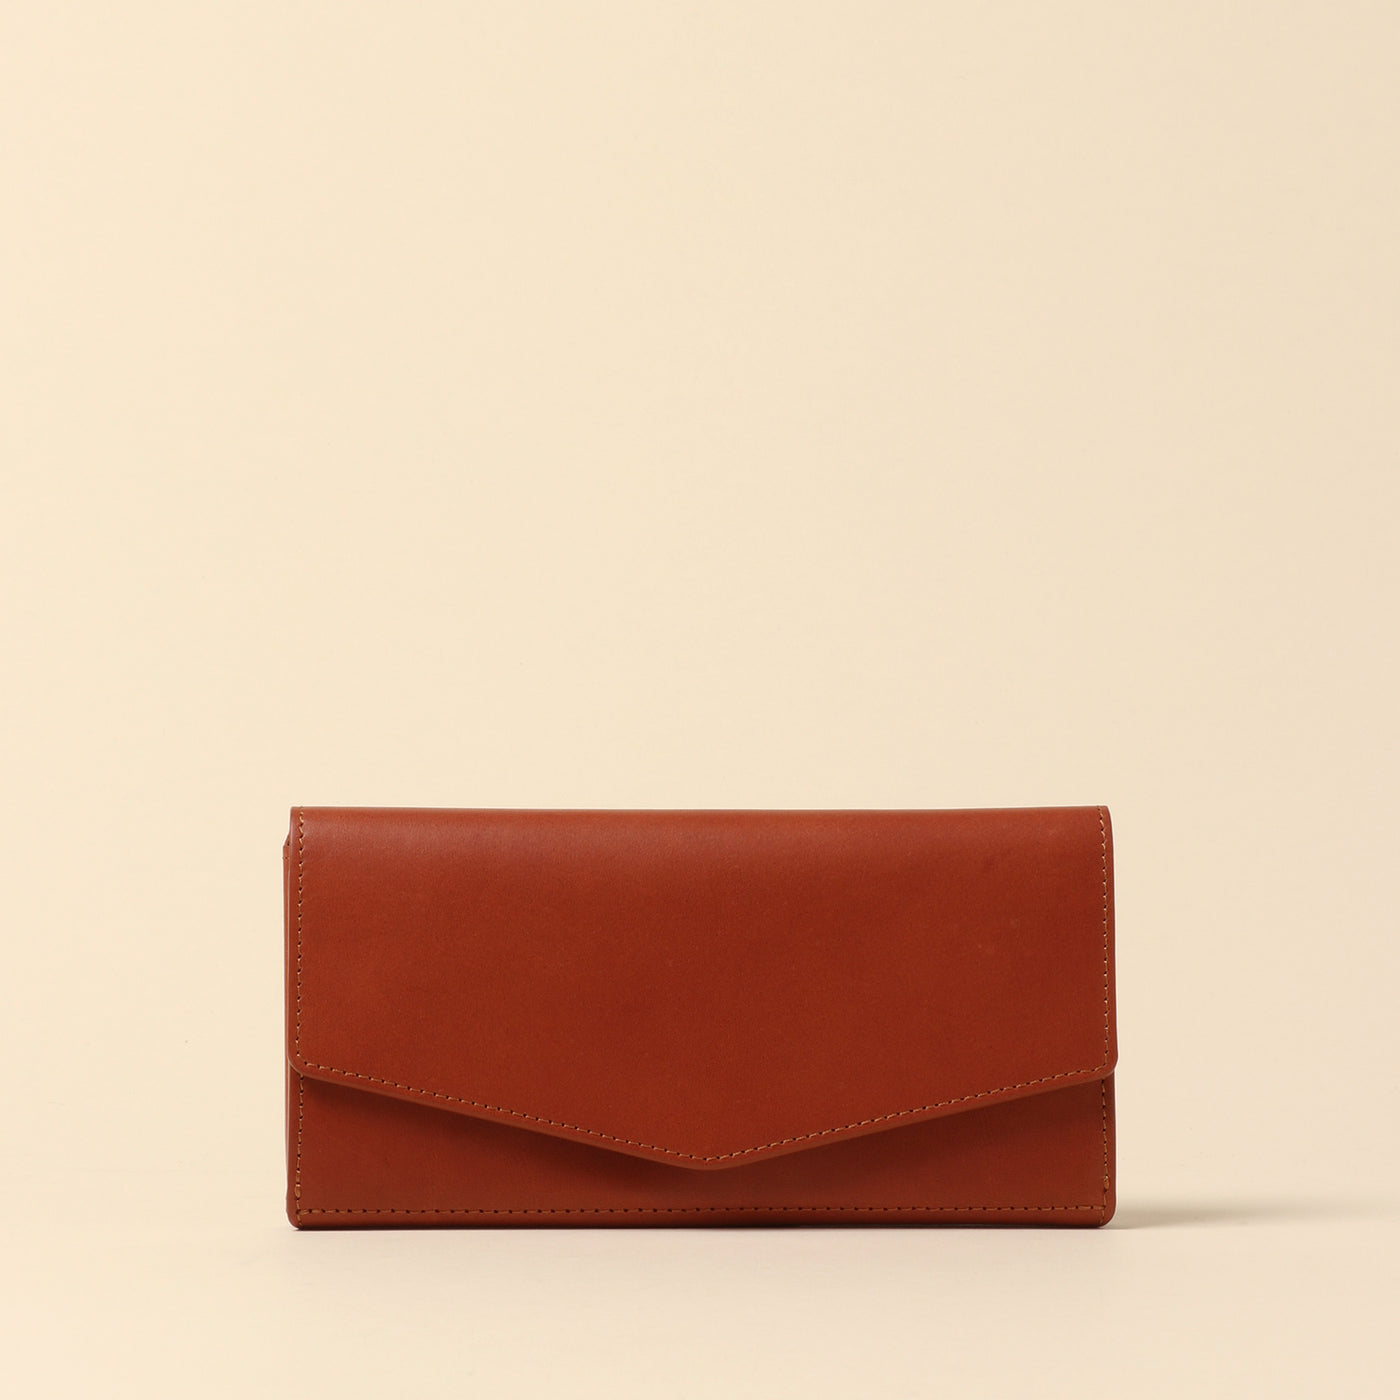 <Vintage Revival Productions> Loneo long wallet/light brown